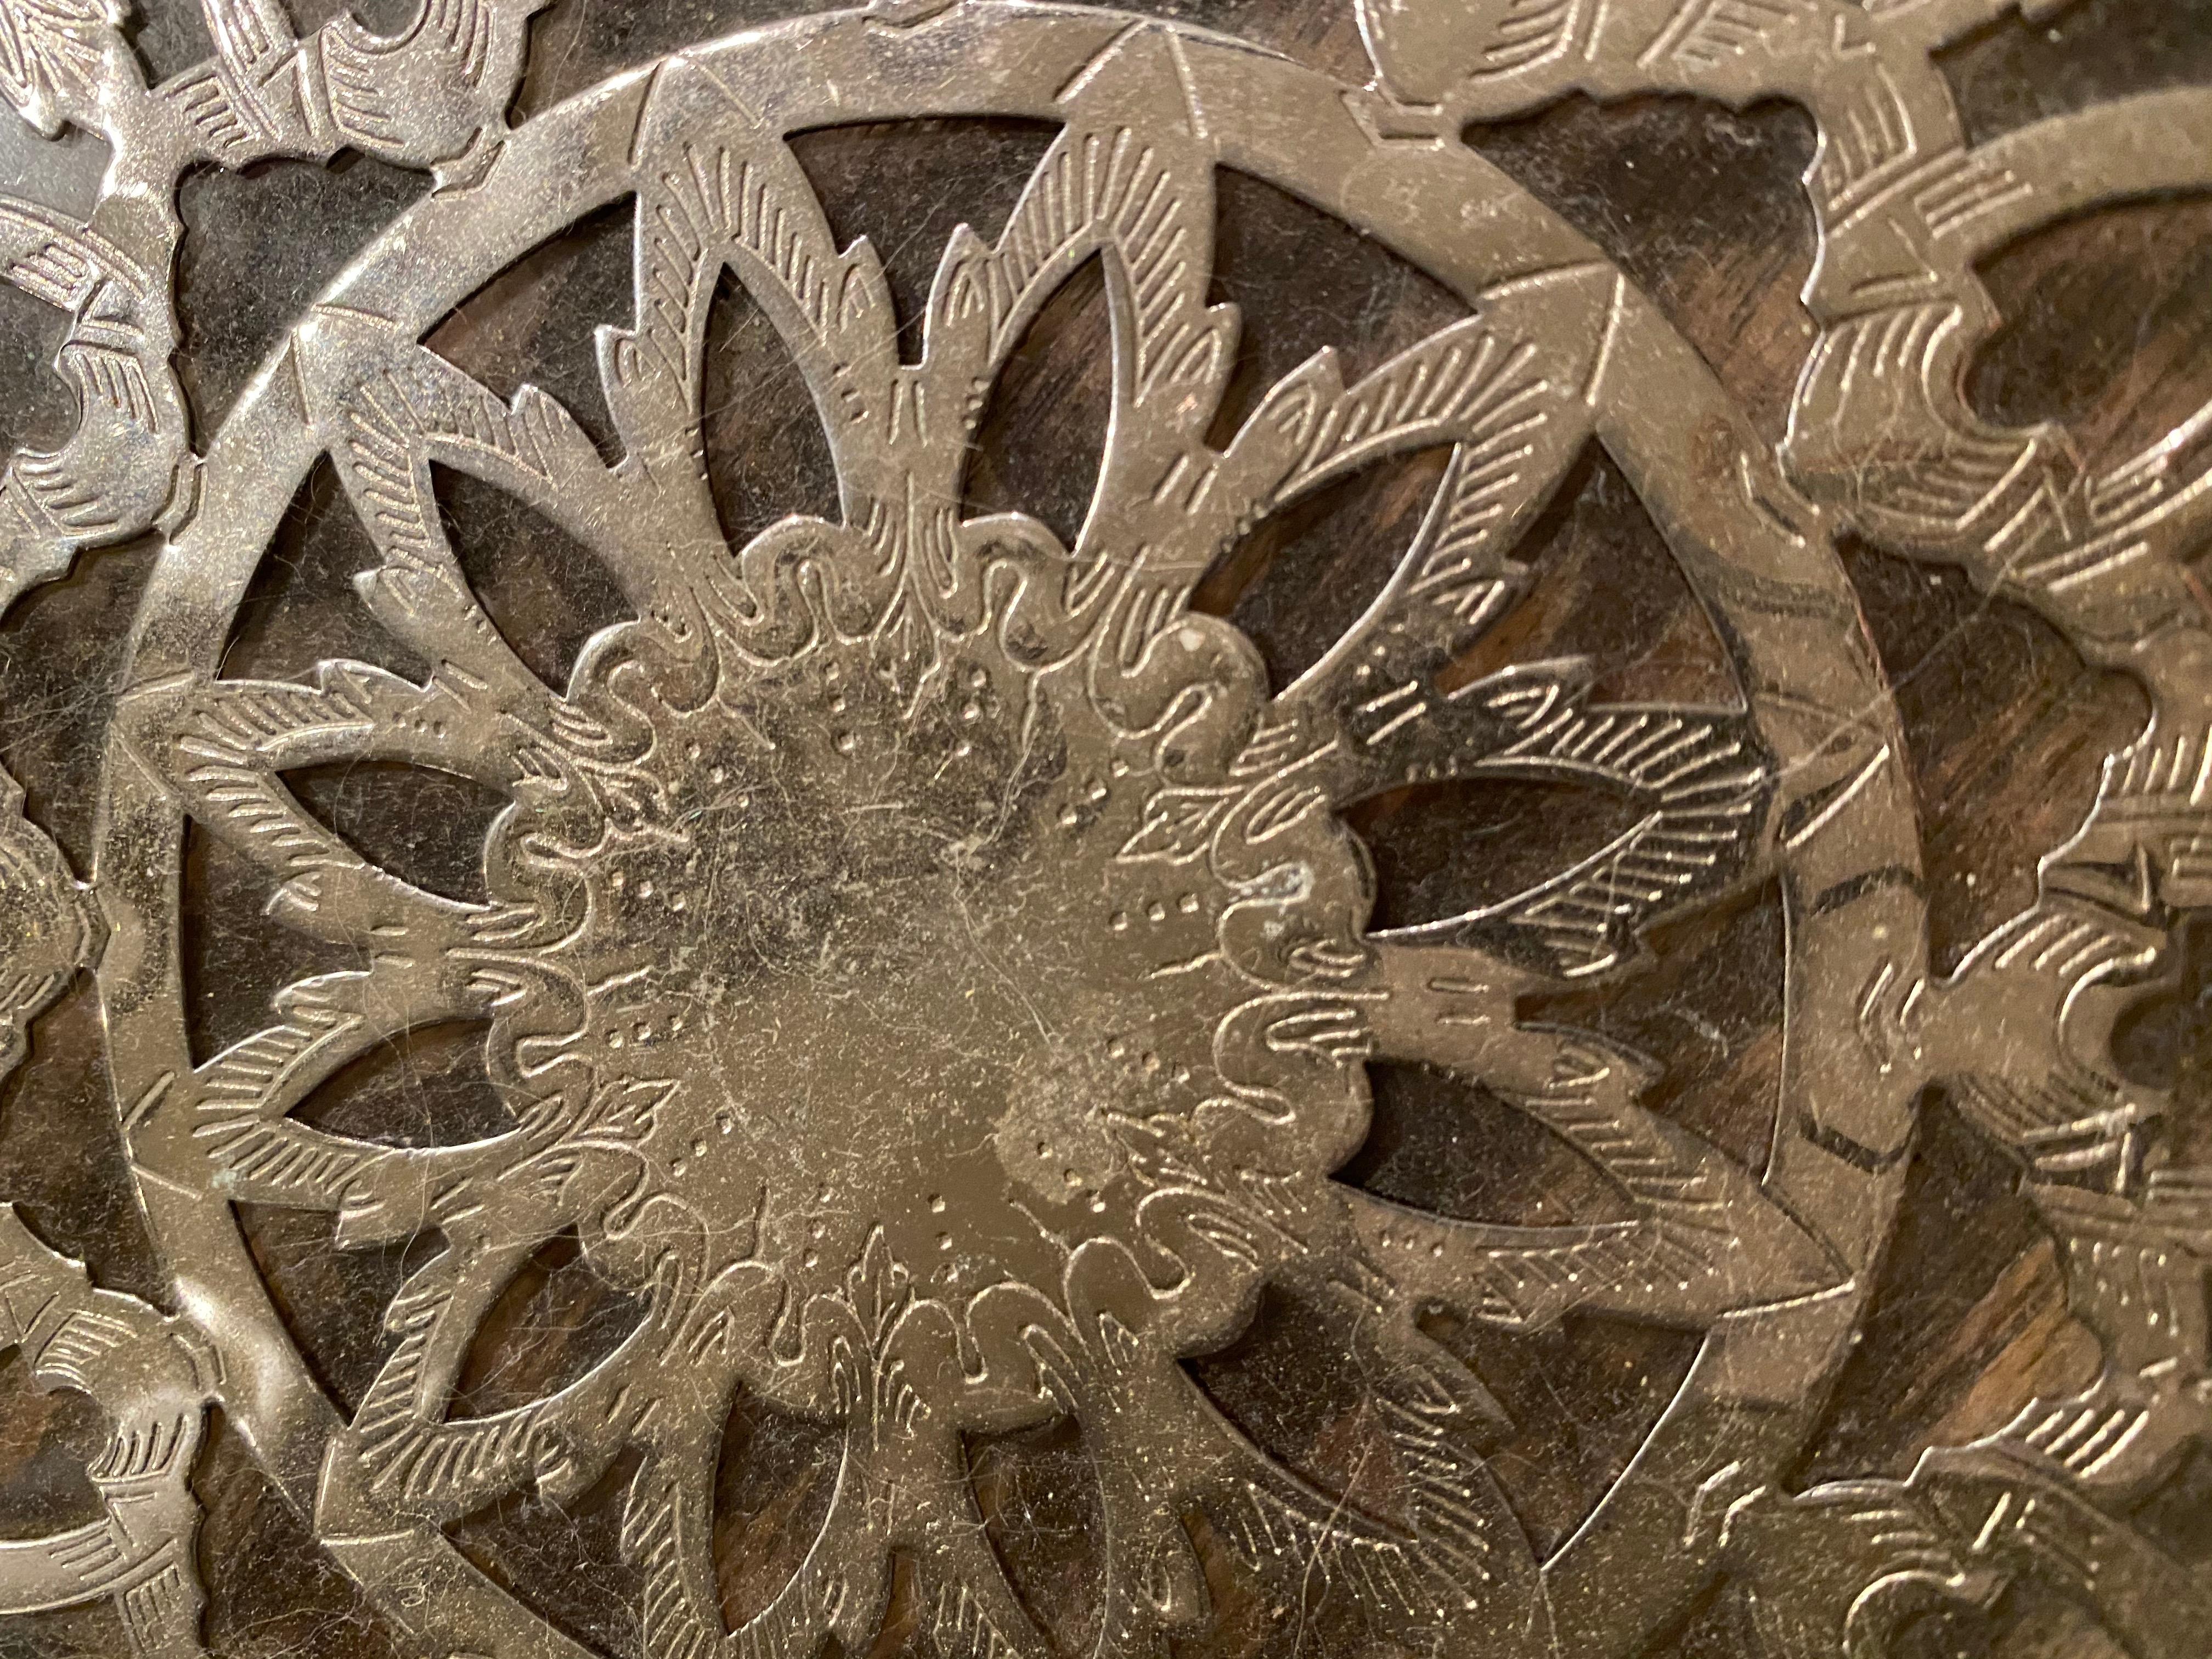 Early to mid-20th century etched silver plate overlay glass trivet. The metal work is detailed with tracery and etched design. A beautiful detail for any kitchen. Great for setting hot pots and pans and a great accent for the countertop or dining